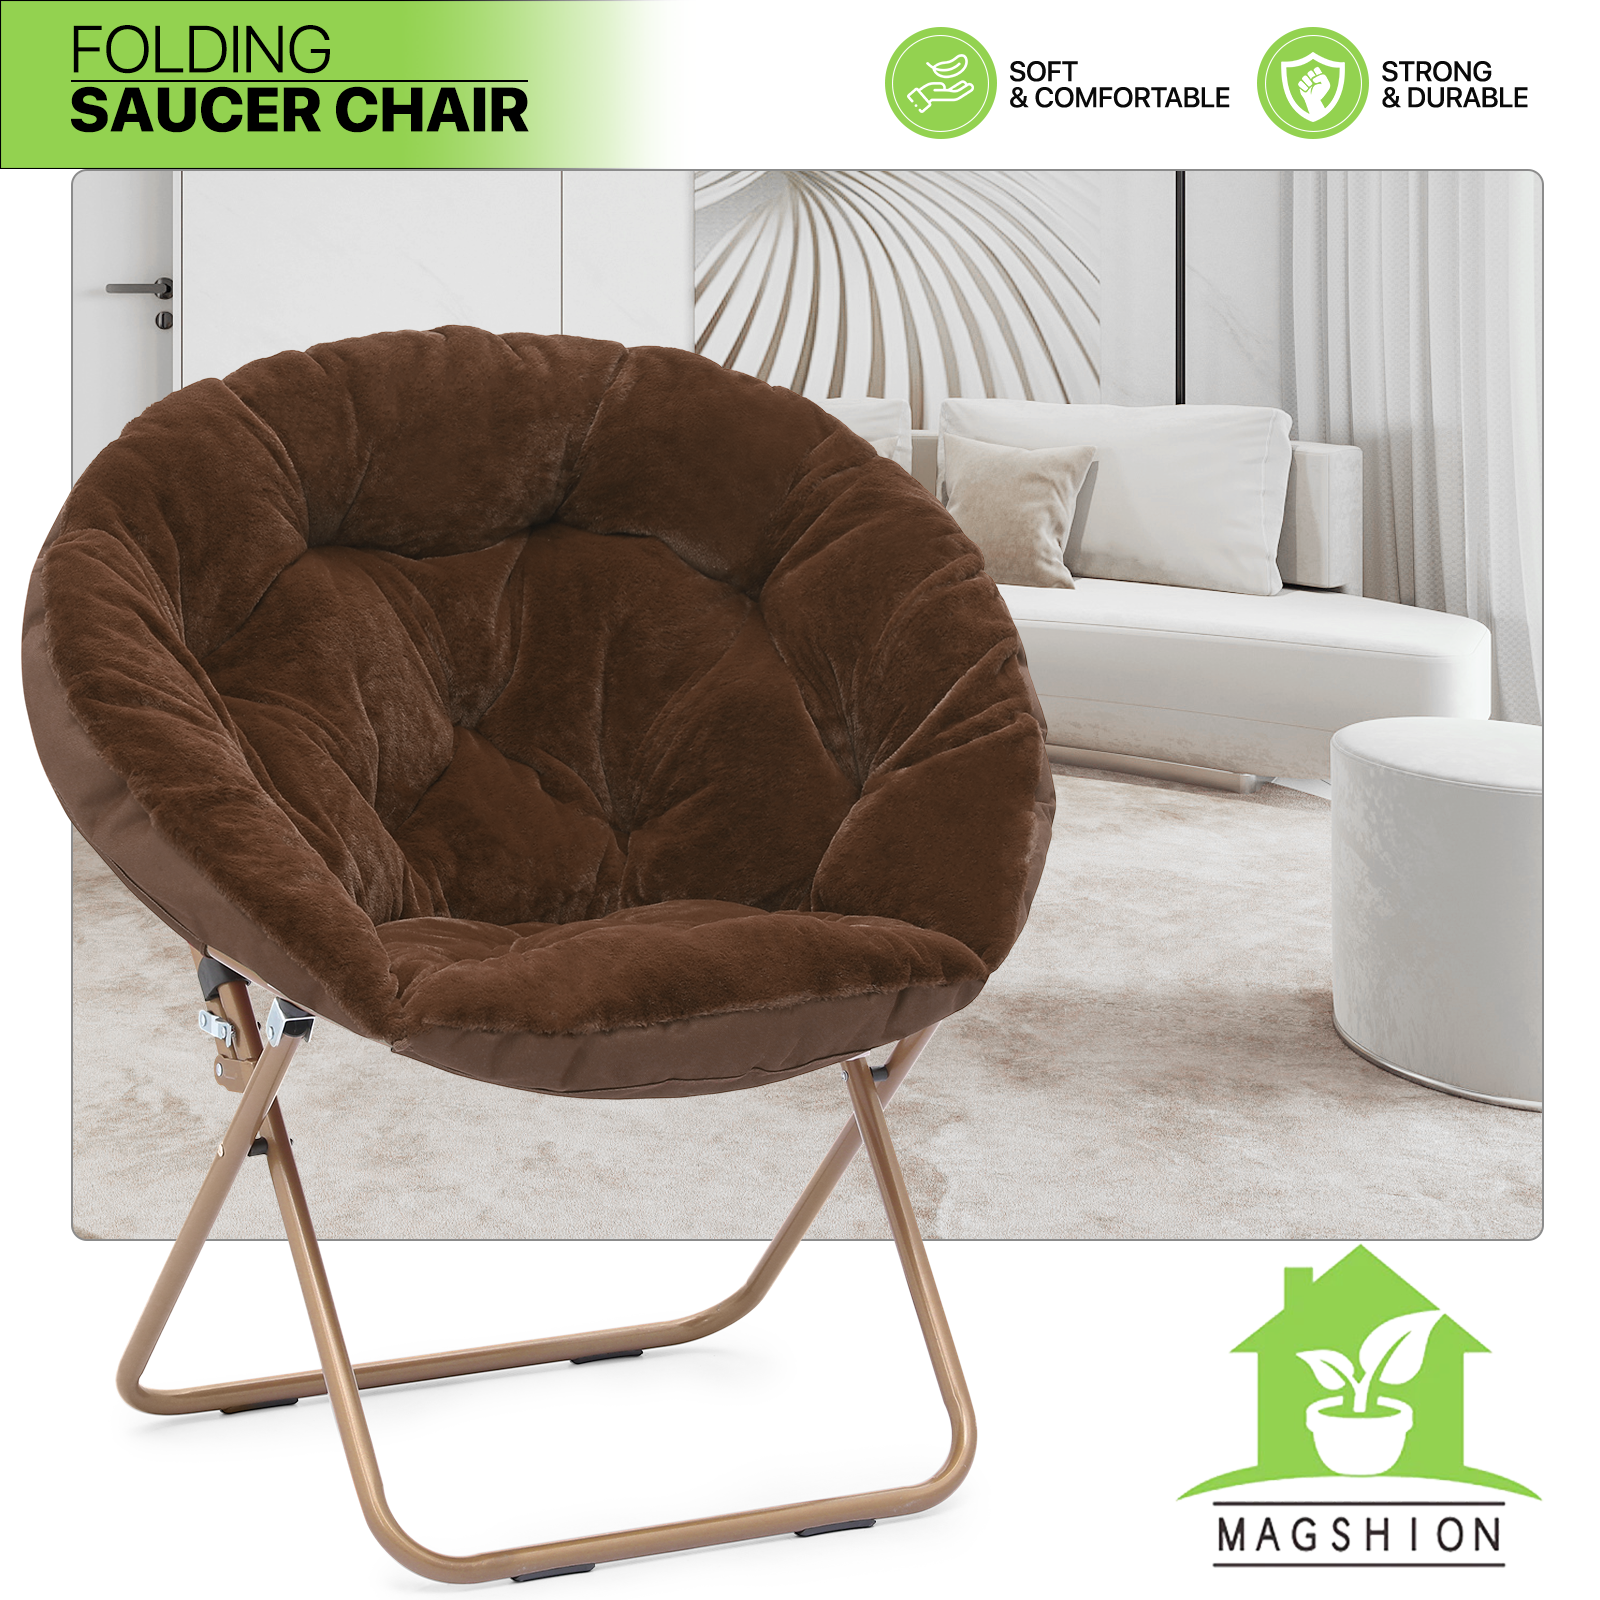 Magshion Folding Lounge Chair Comfy Faux Fur Saucer Chair, Cozy Moon Chair Seating with Metal Frame for Home Living Room Bedroom, Brown - image 2 of 10